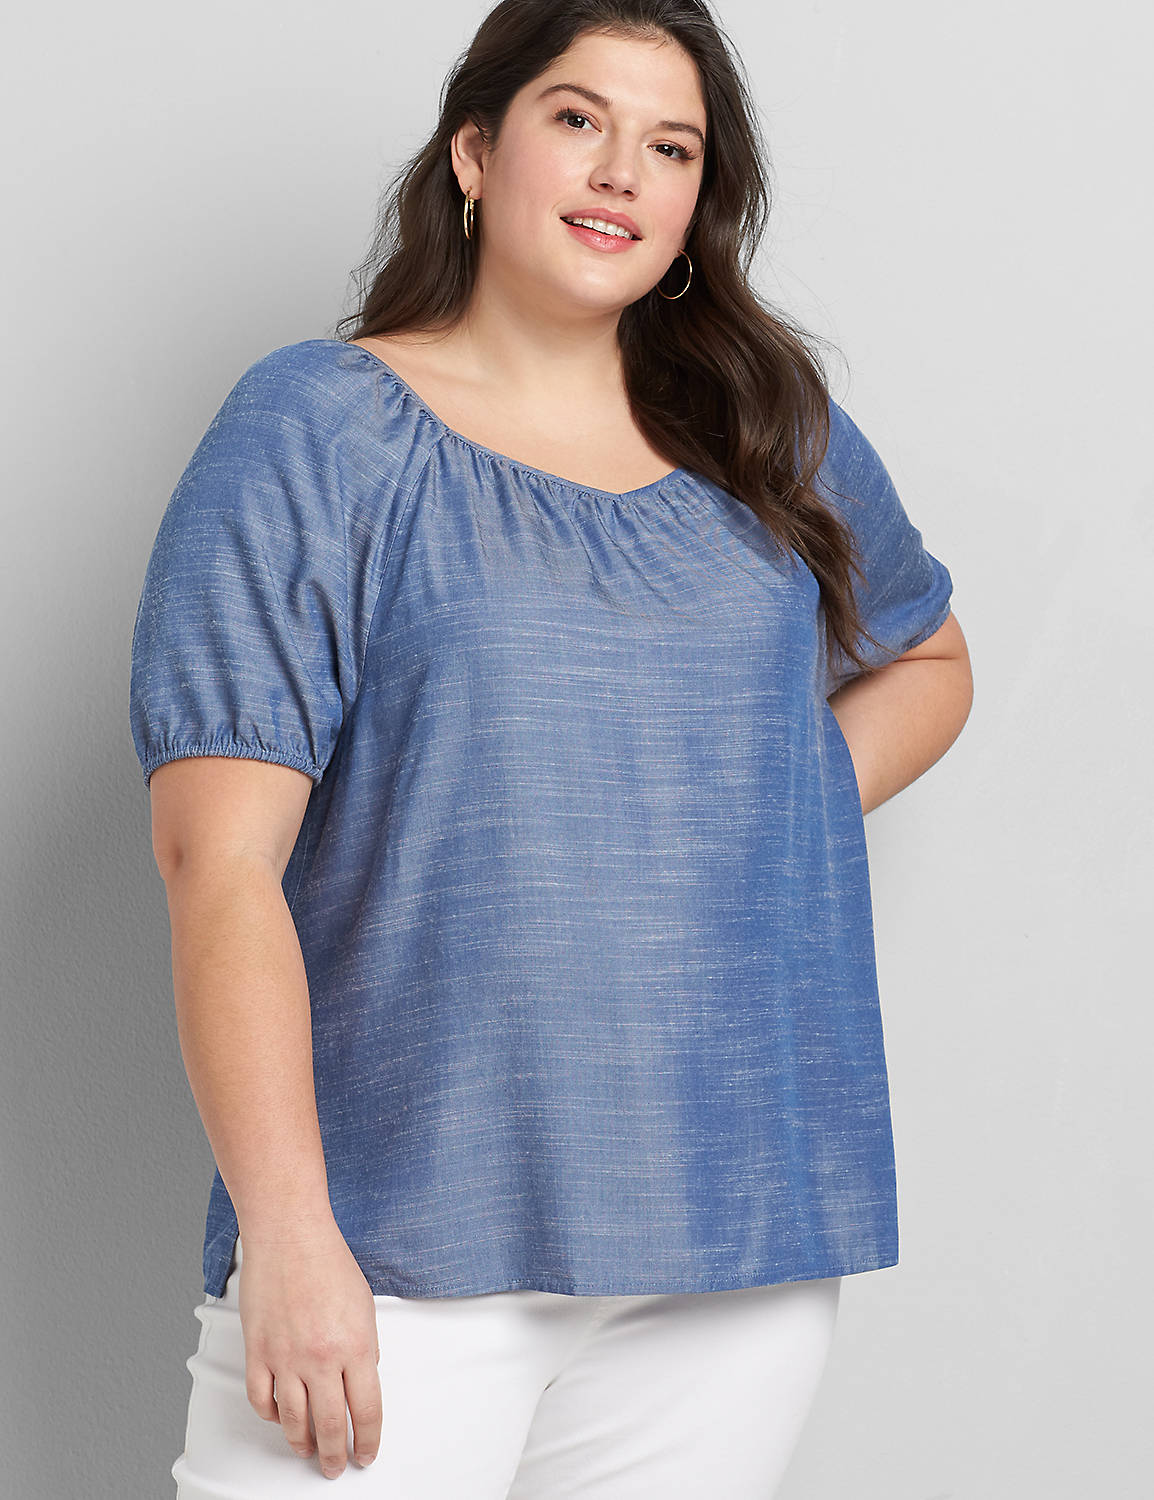 Short Puff Sleeve Square Vneck Chambray Top 1118472:Chambray:16 Product Image 1